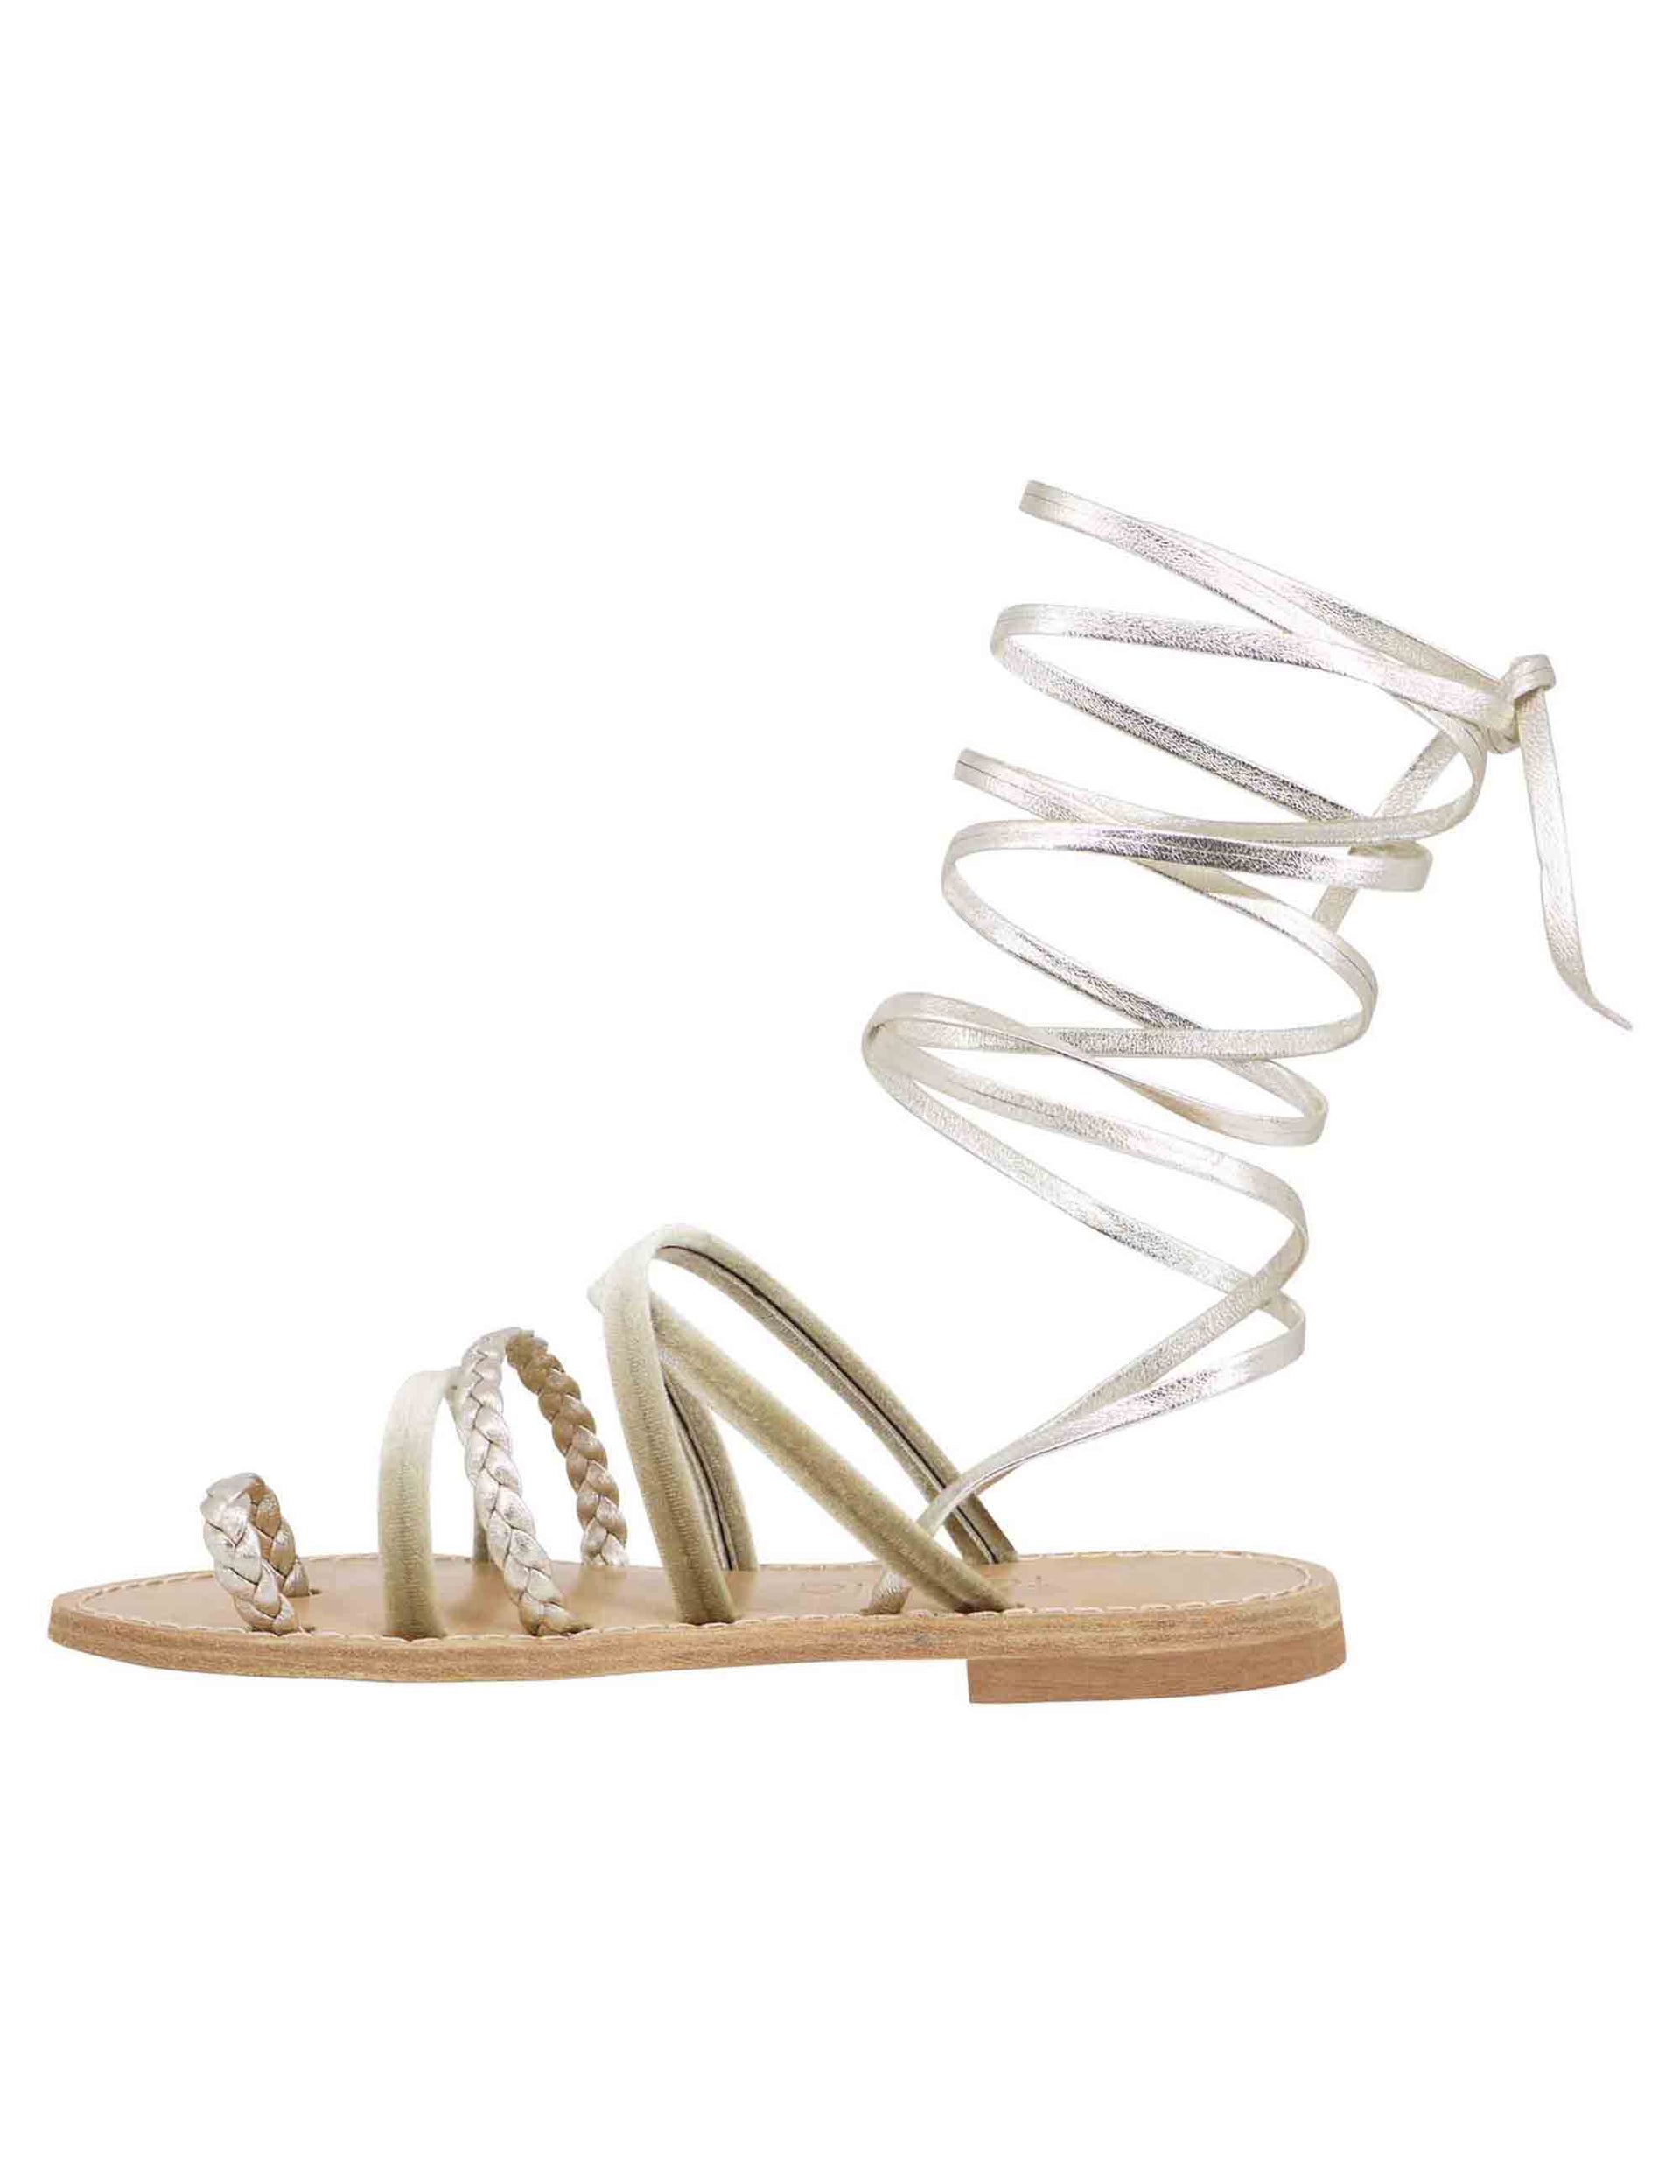 Women's flat sandals in silver woven leather with ankle straps